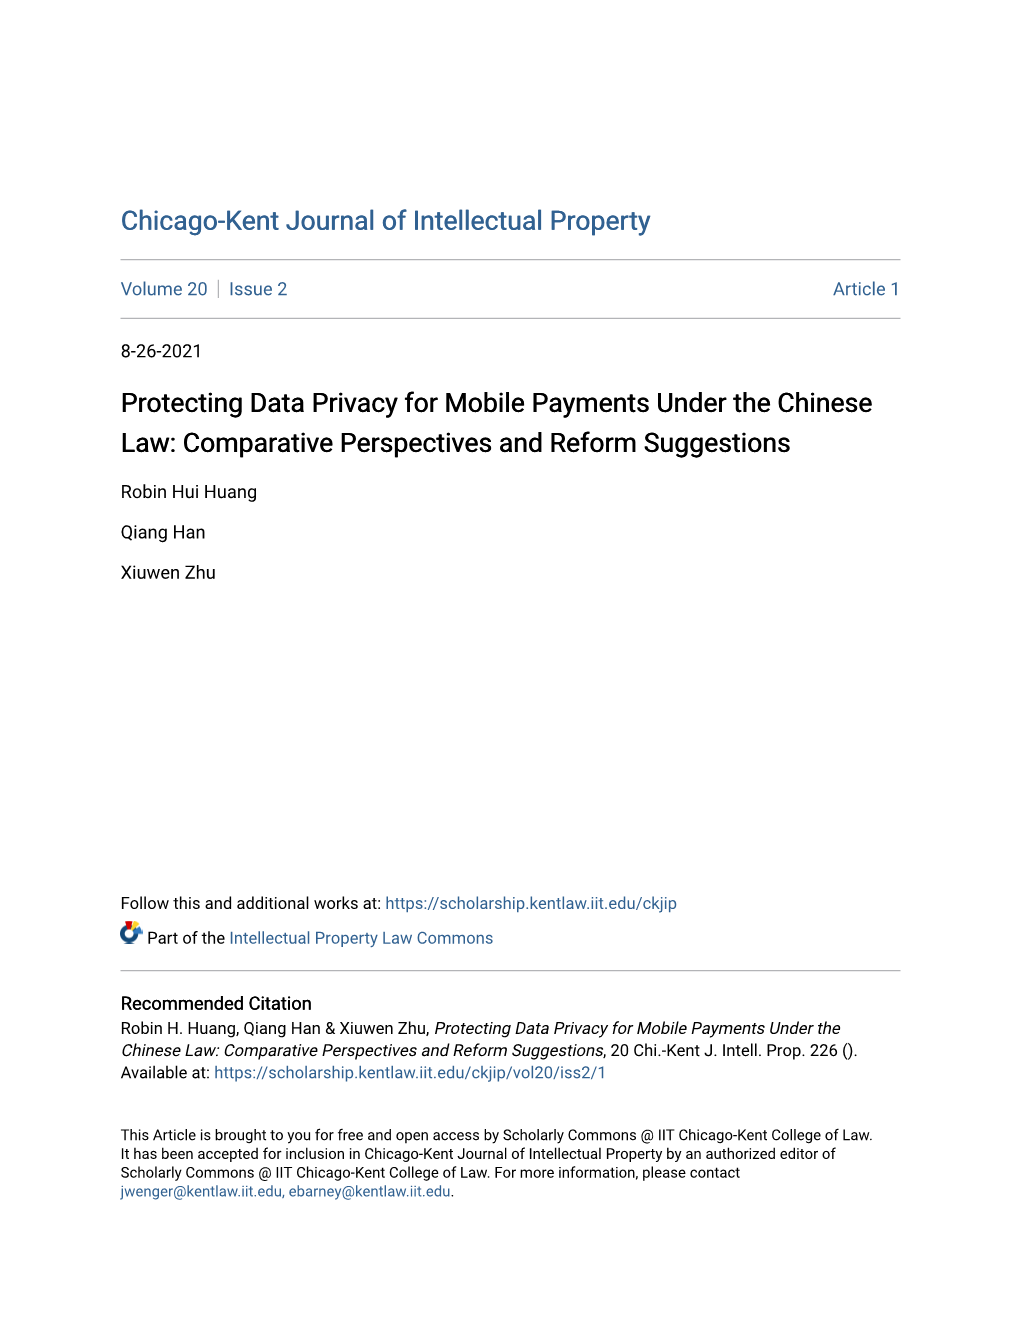 Protecting Data Privacy for Mobile Payments Under the Chinese Law: Comparative Perspectives and Reform Suggestions